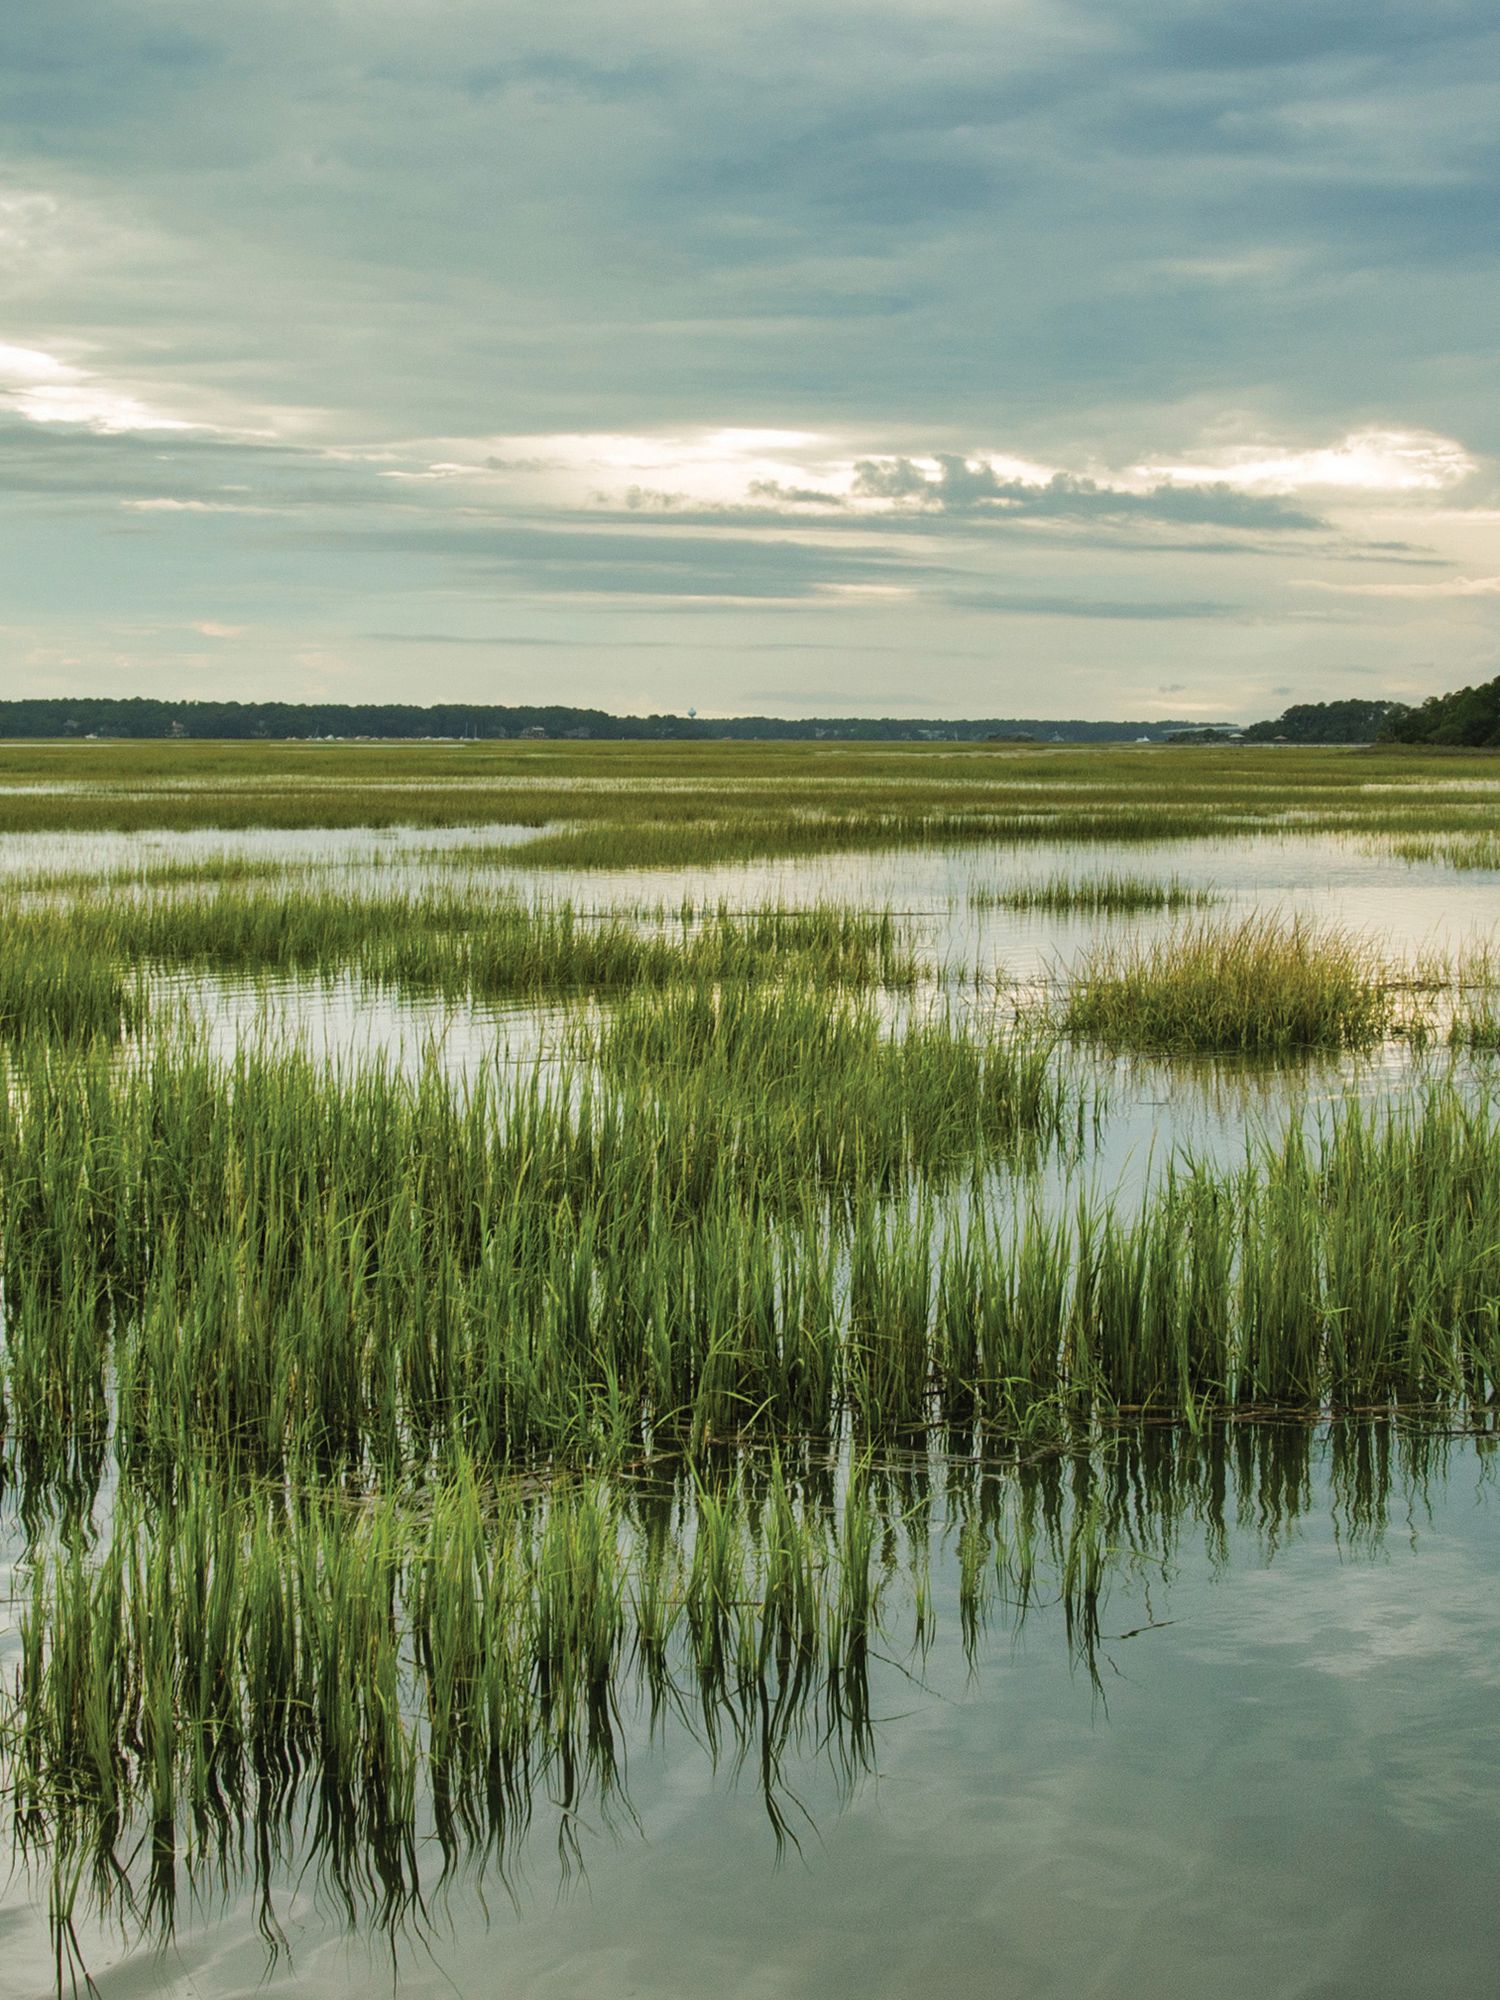 The Supreme Court's latest ruling changes the way wetlands are